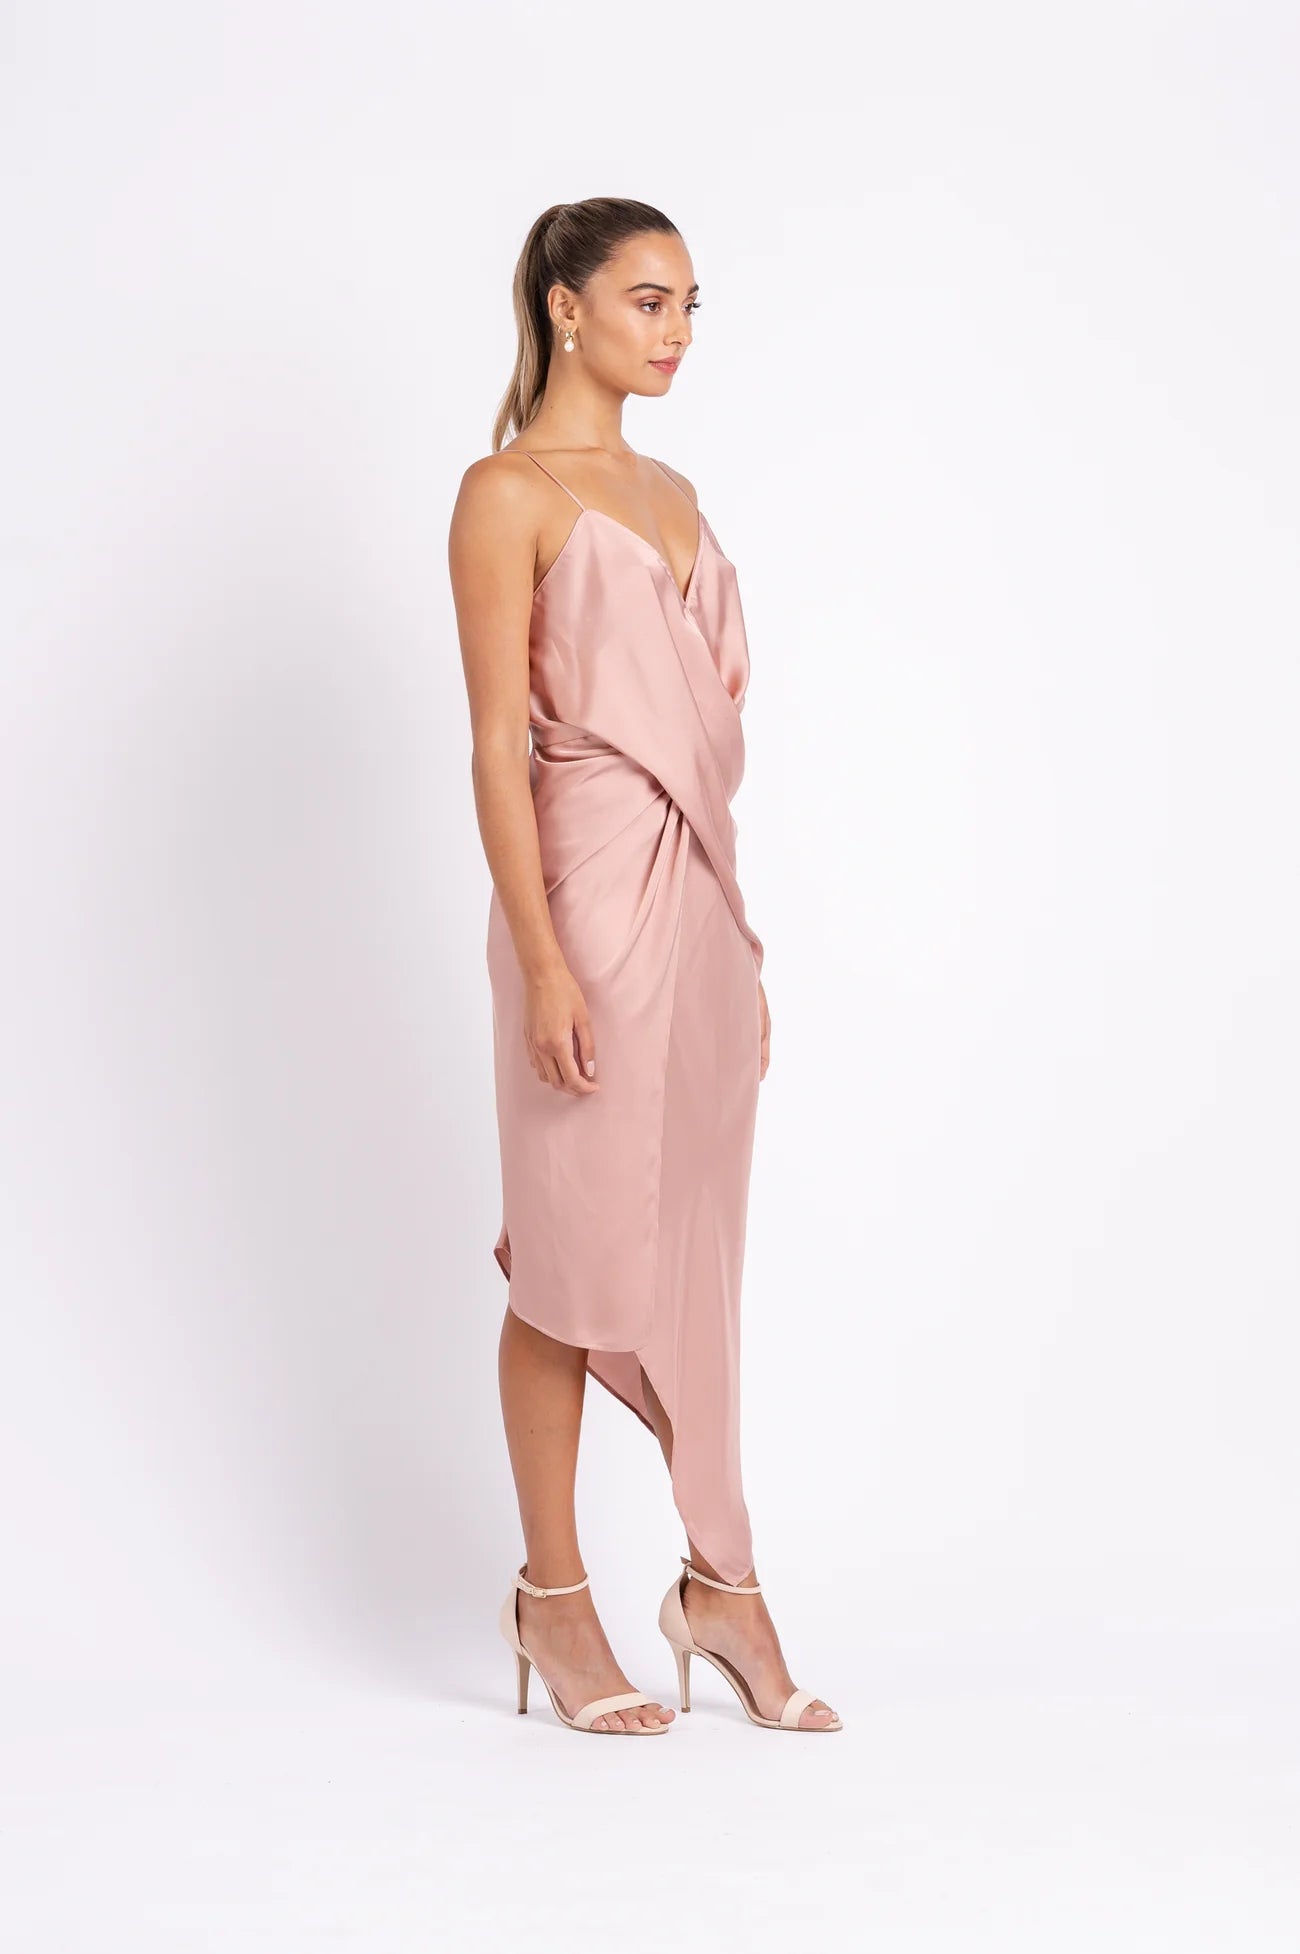 One Fell Swoop Le Luxe Midi, Dusty Rose